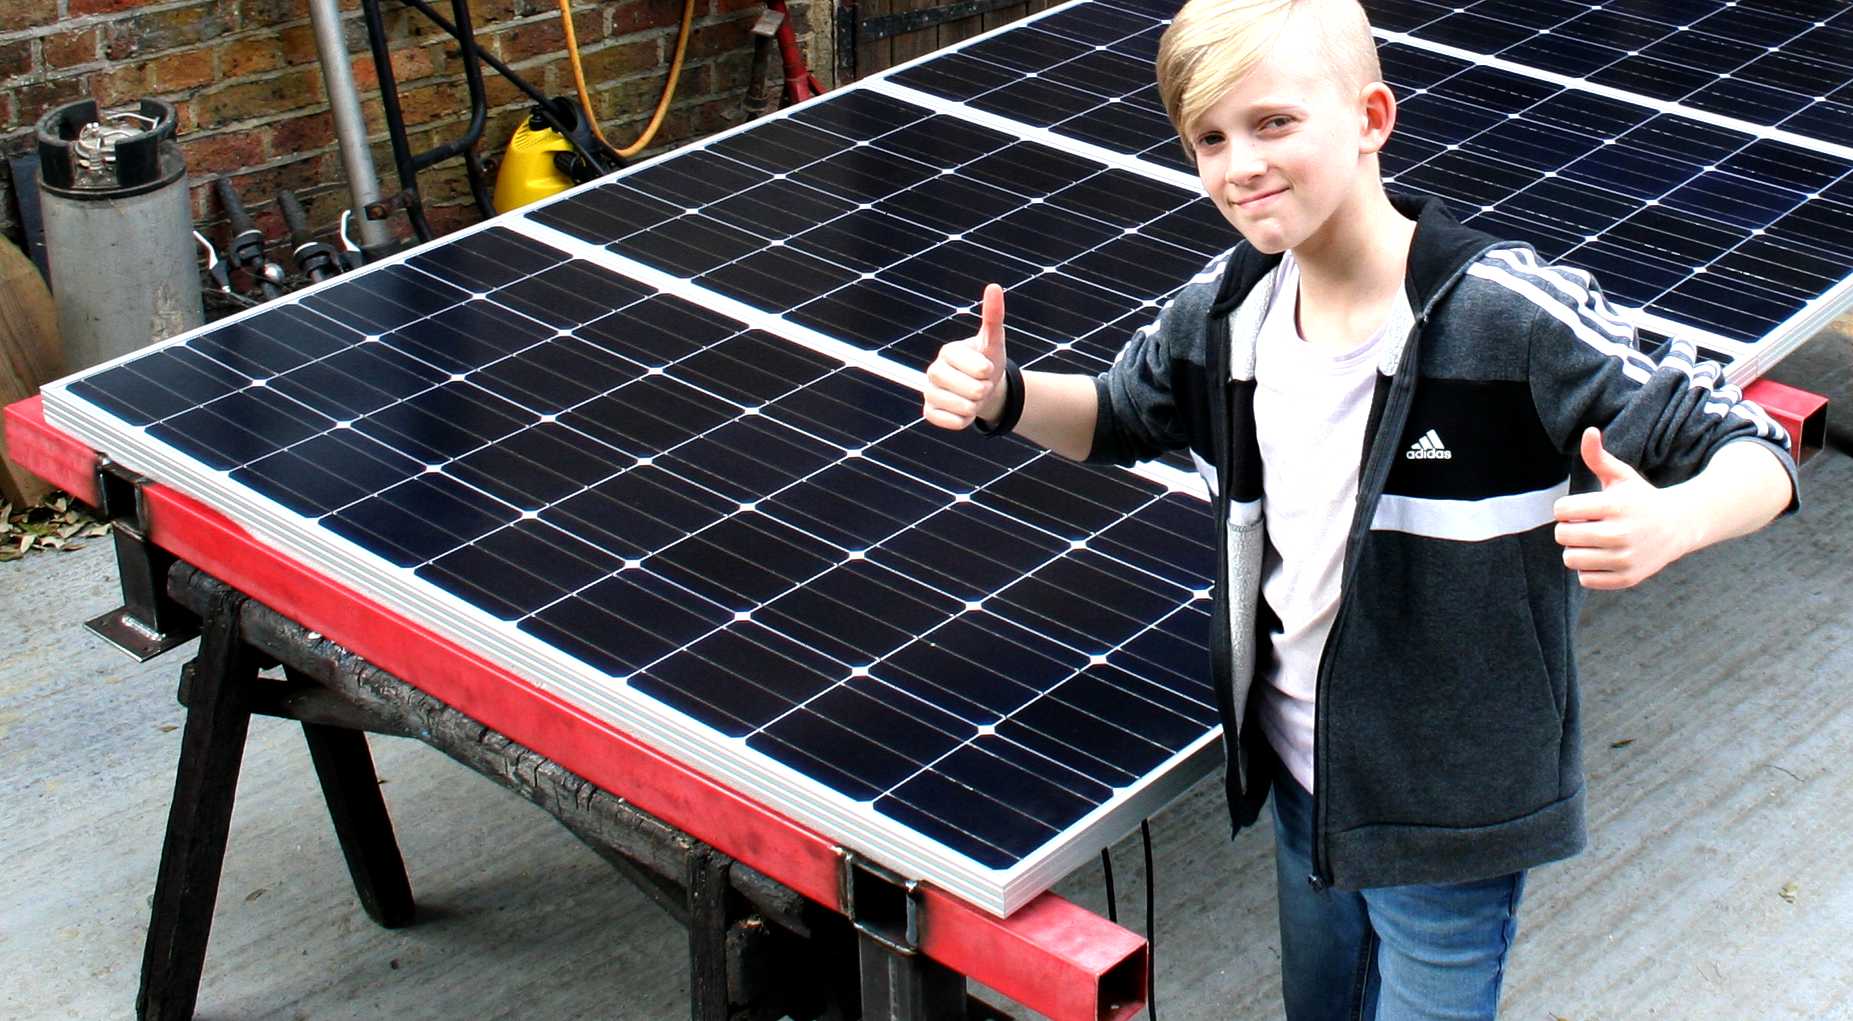 Ryan Dusart checks out these solar panels